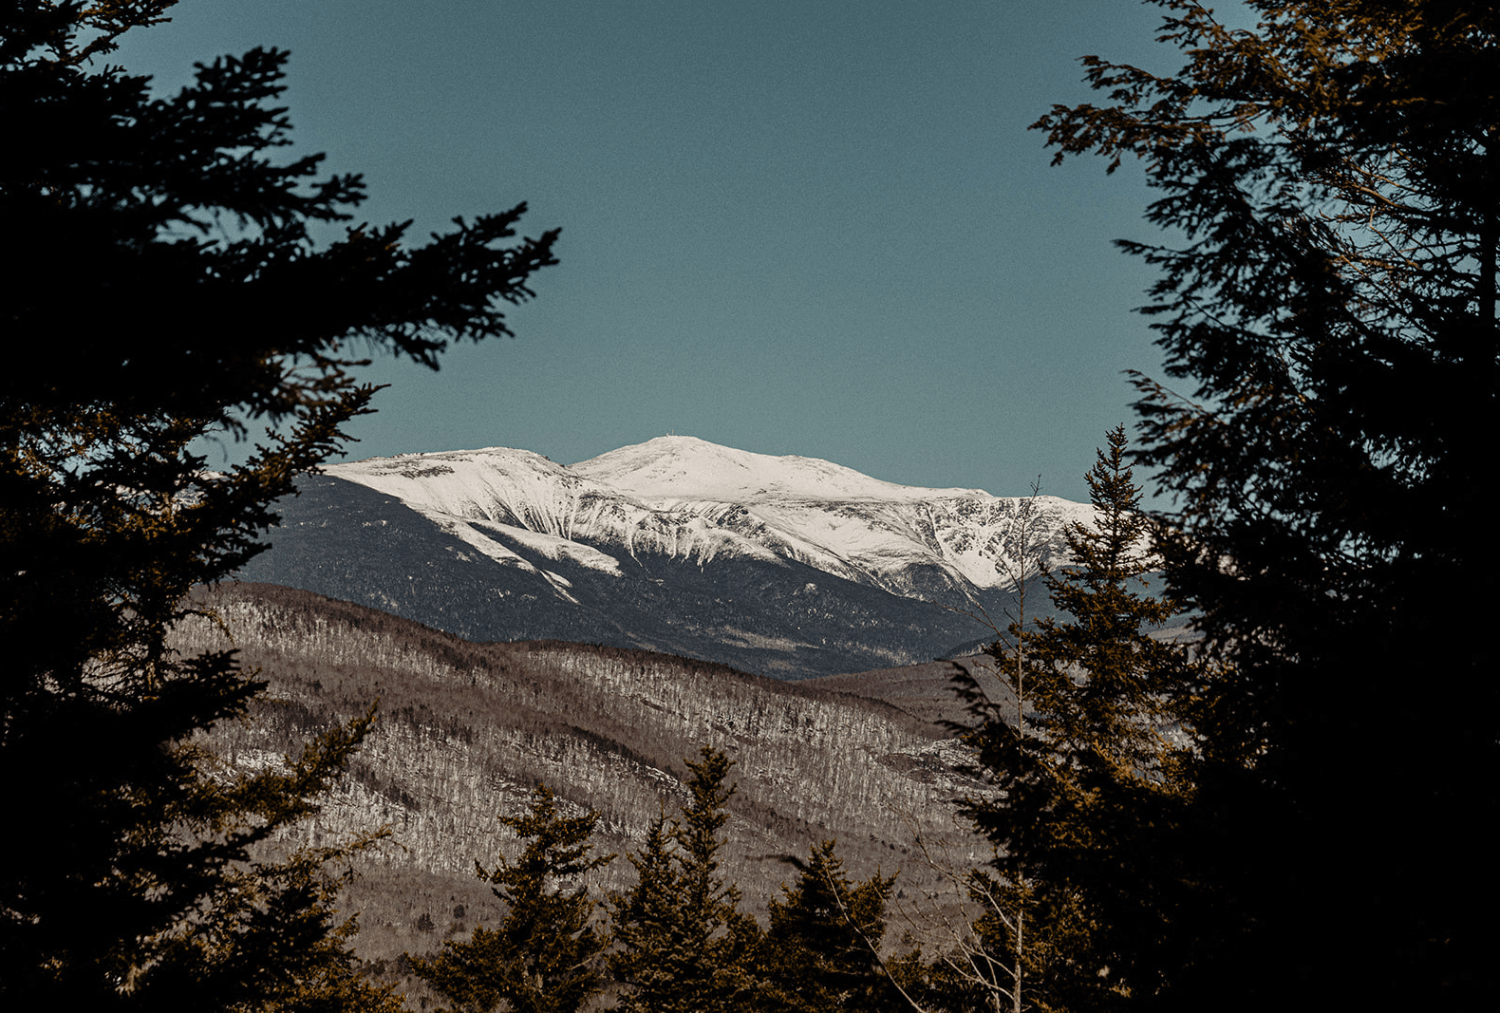 Mountains and trees in Jackson, NH